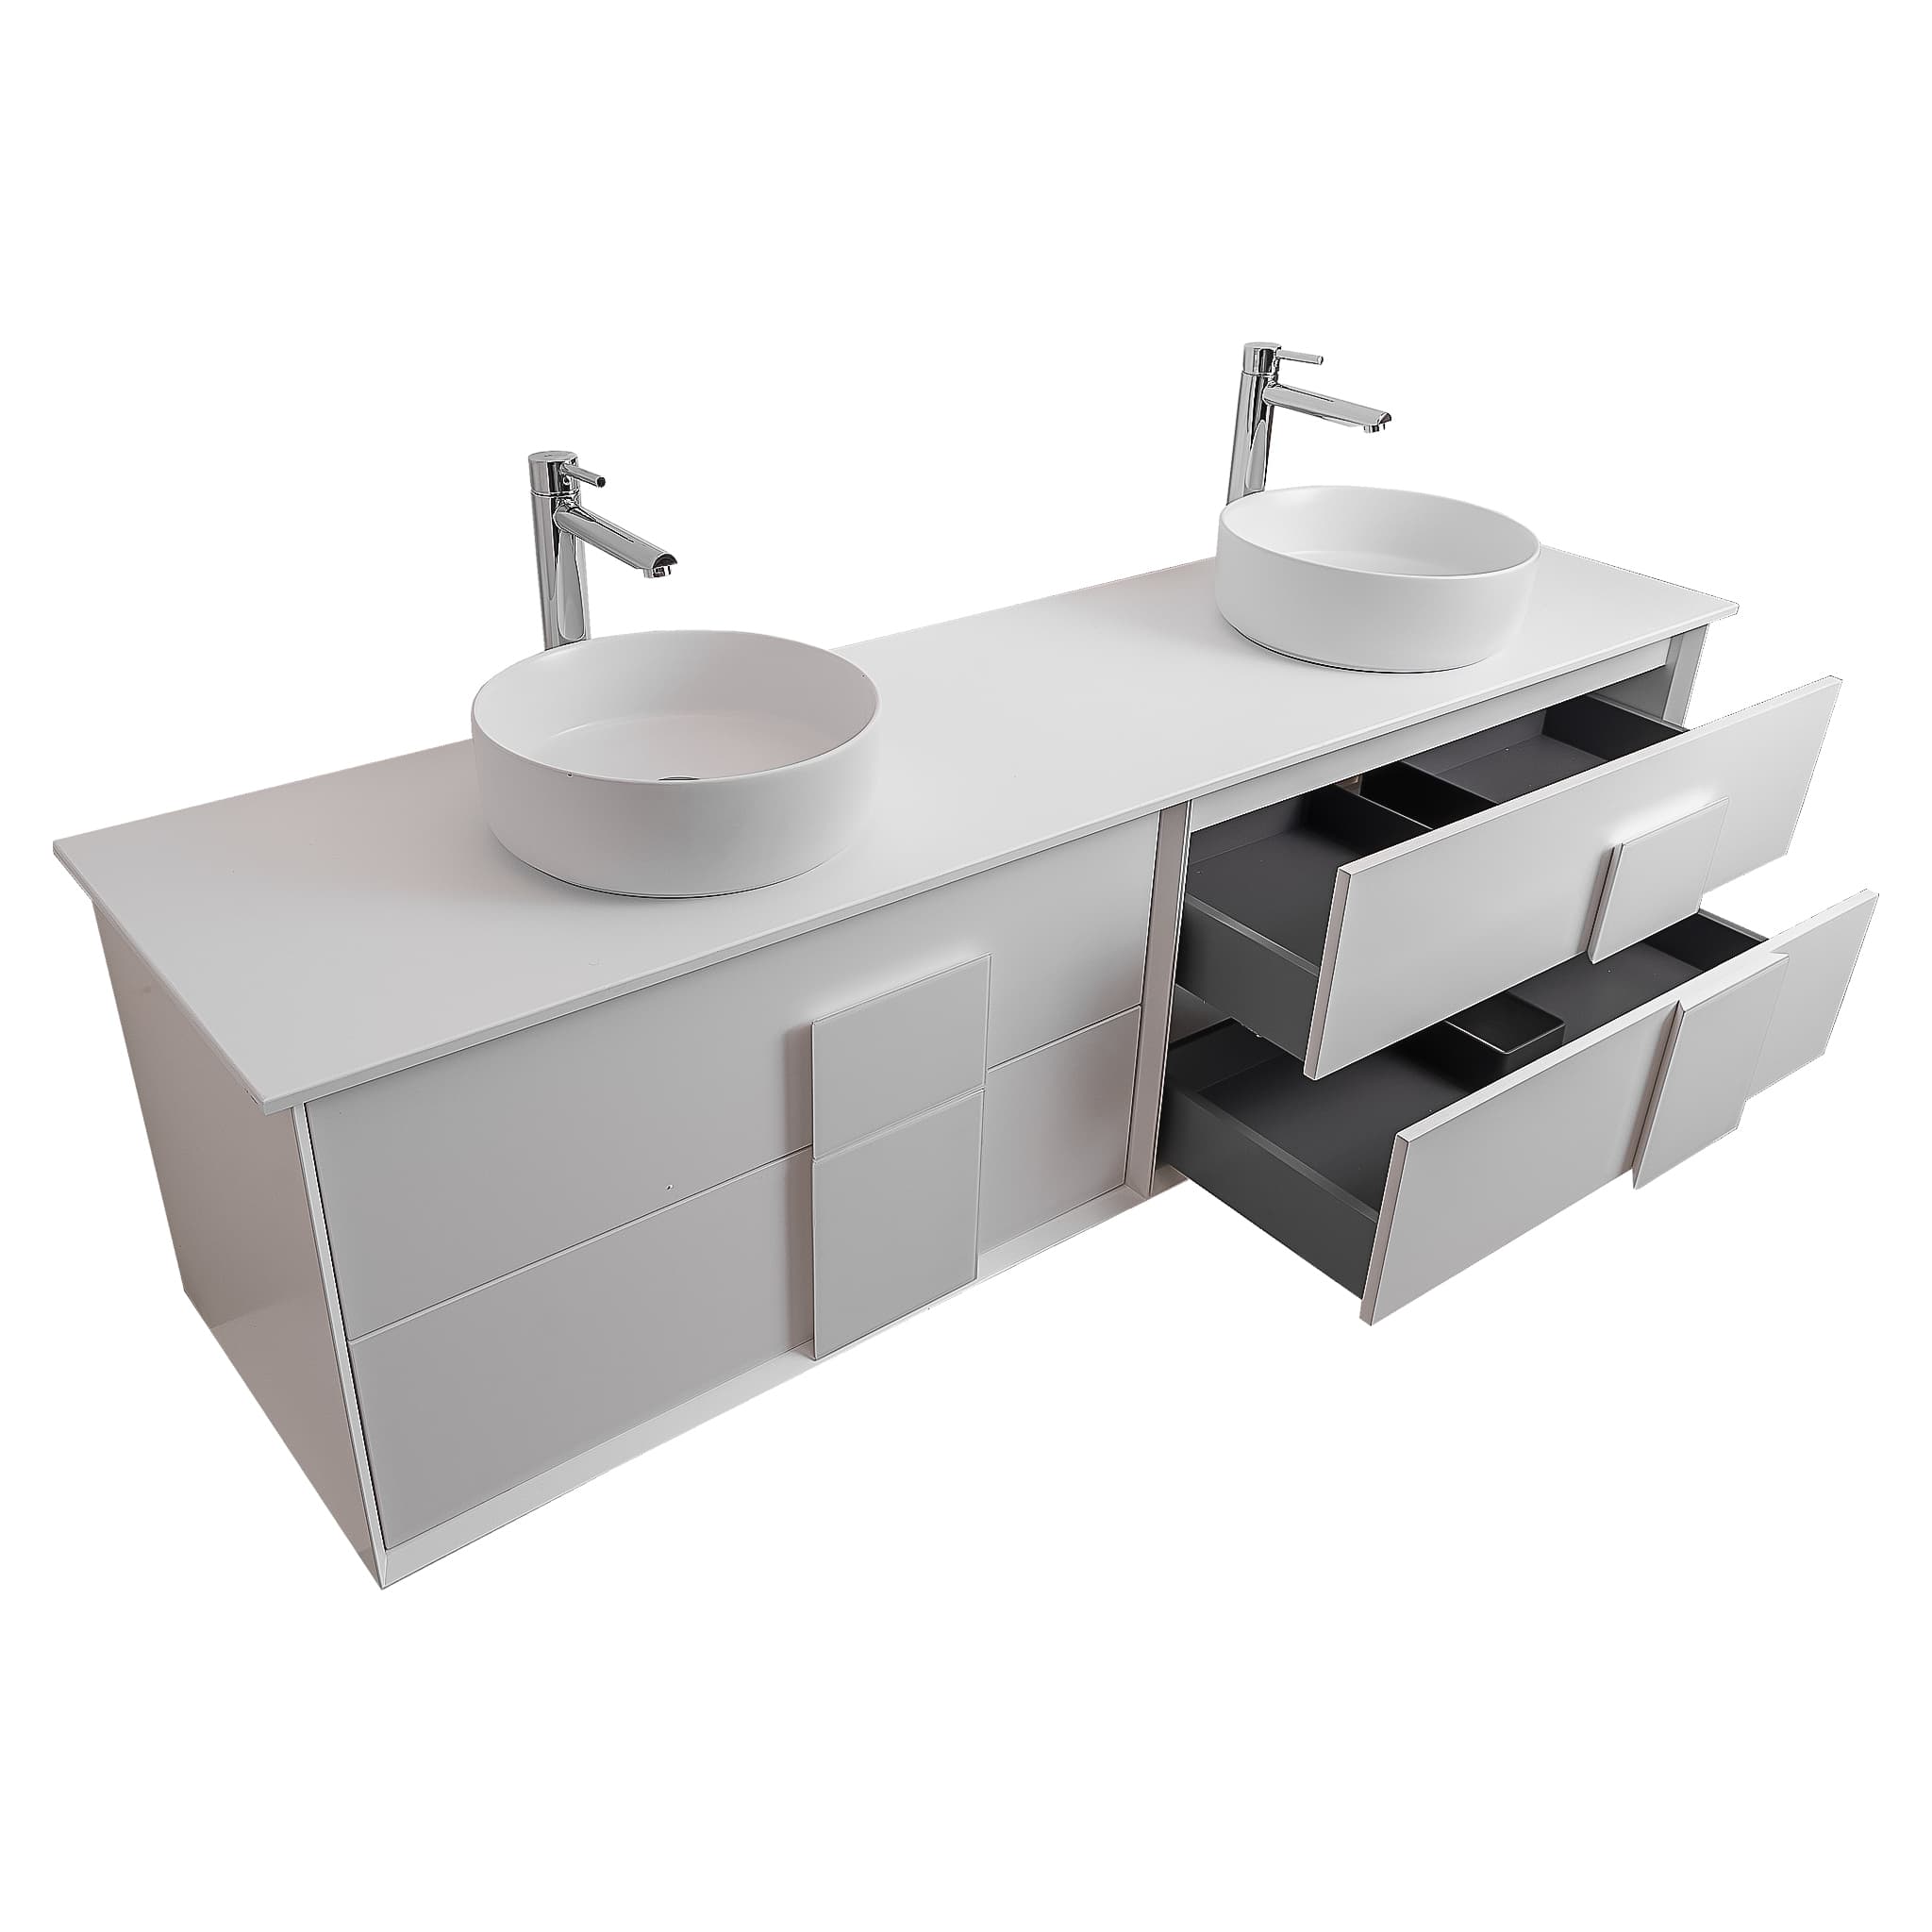 Piazza 63 Matte White With White Handle Cabinet, Ares White Top and Two Ares White Ceramic Basin, Wall Mounted Modern Vanity Set